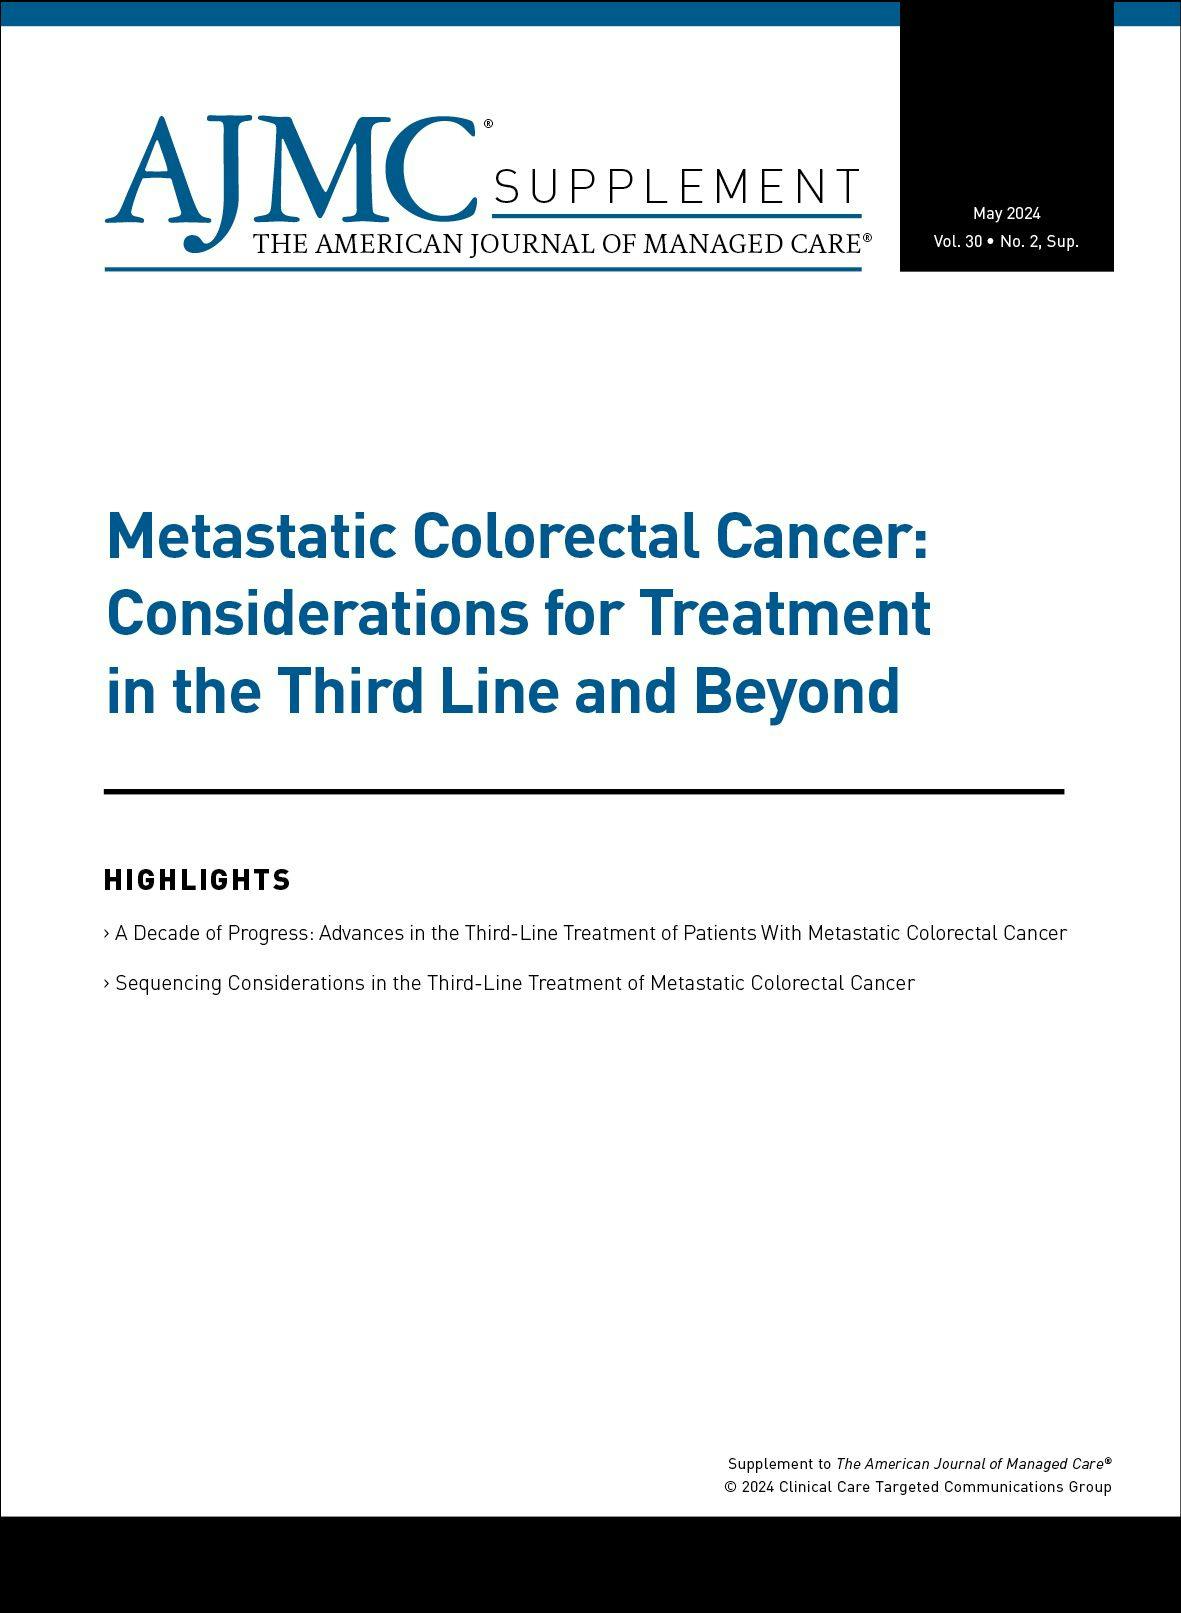 Metastatic Colorectal Cancer: Considerations for Treatment in the Third Line and Beyond